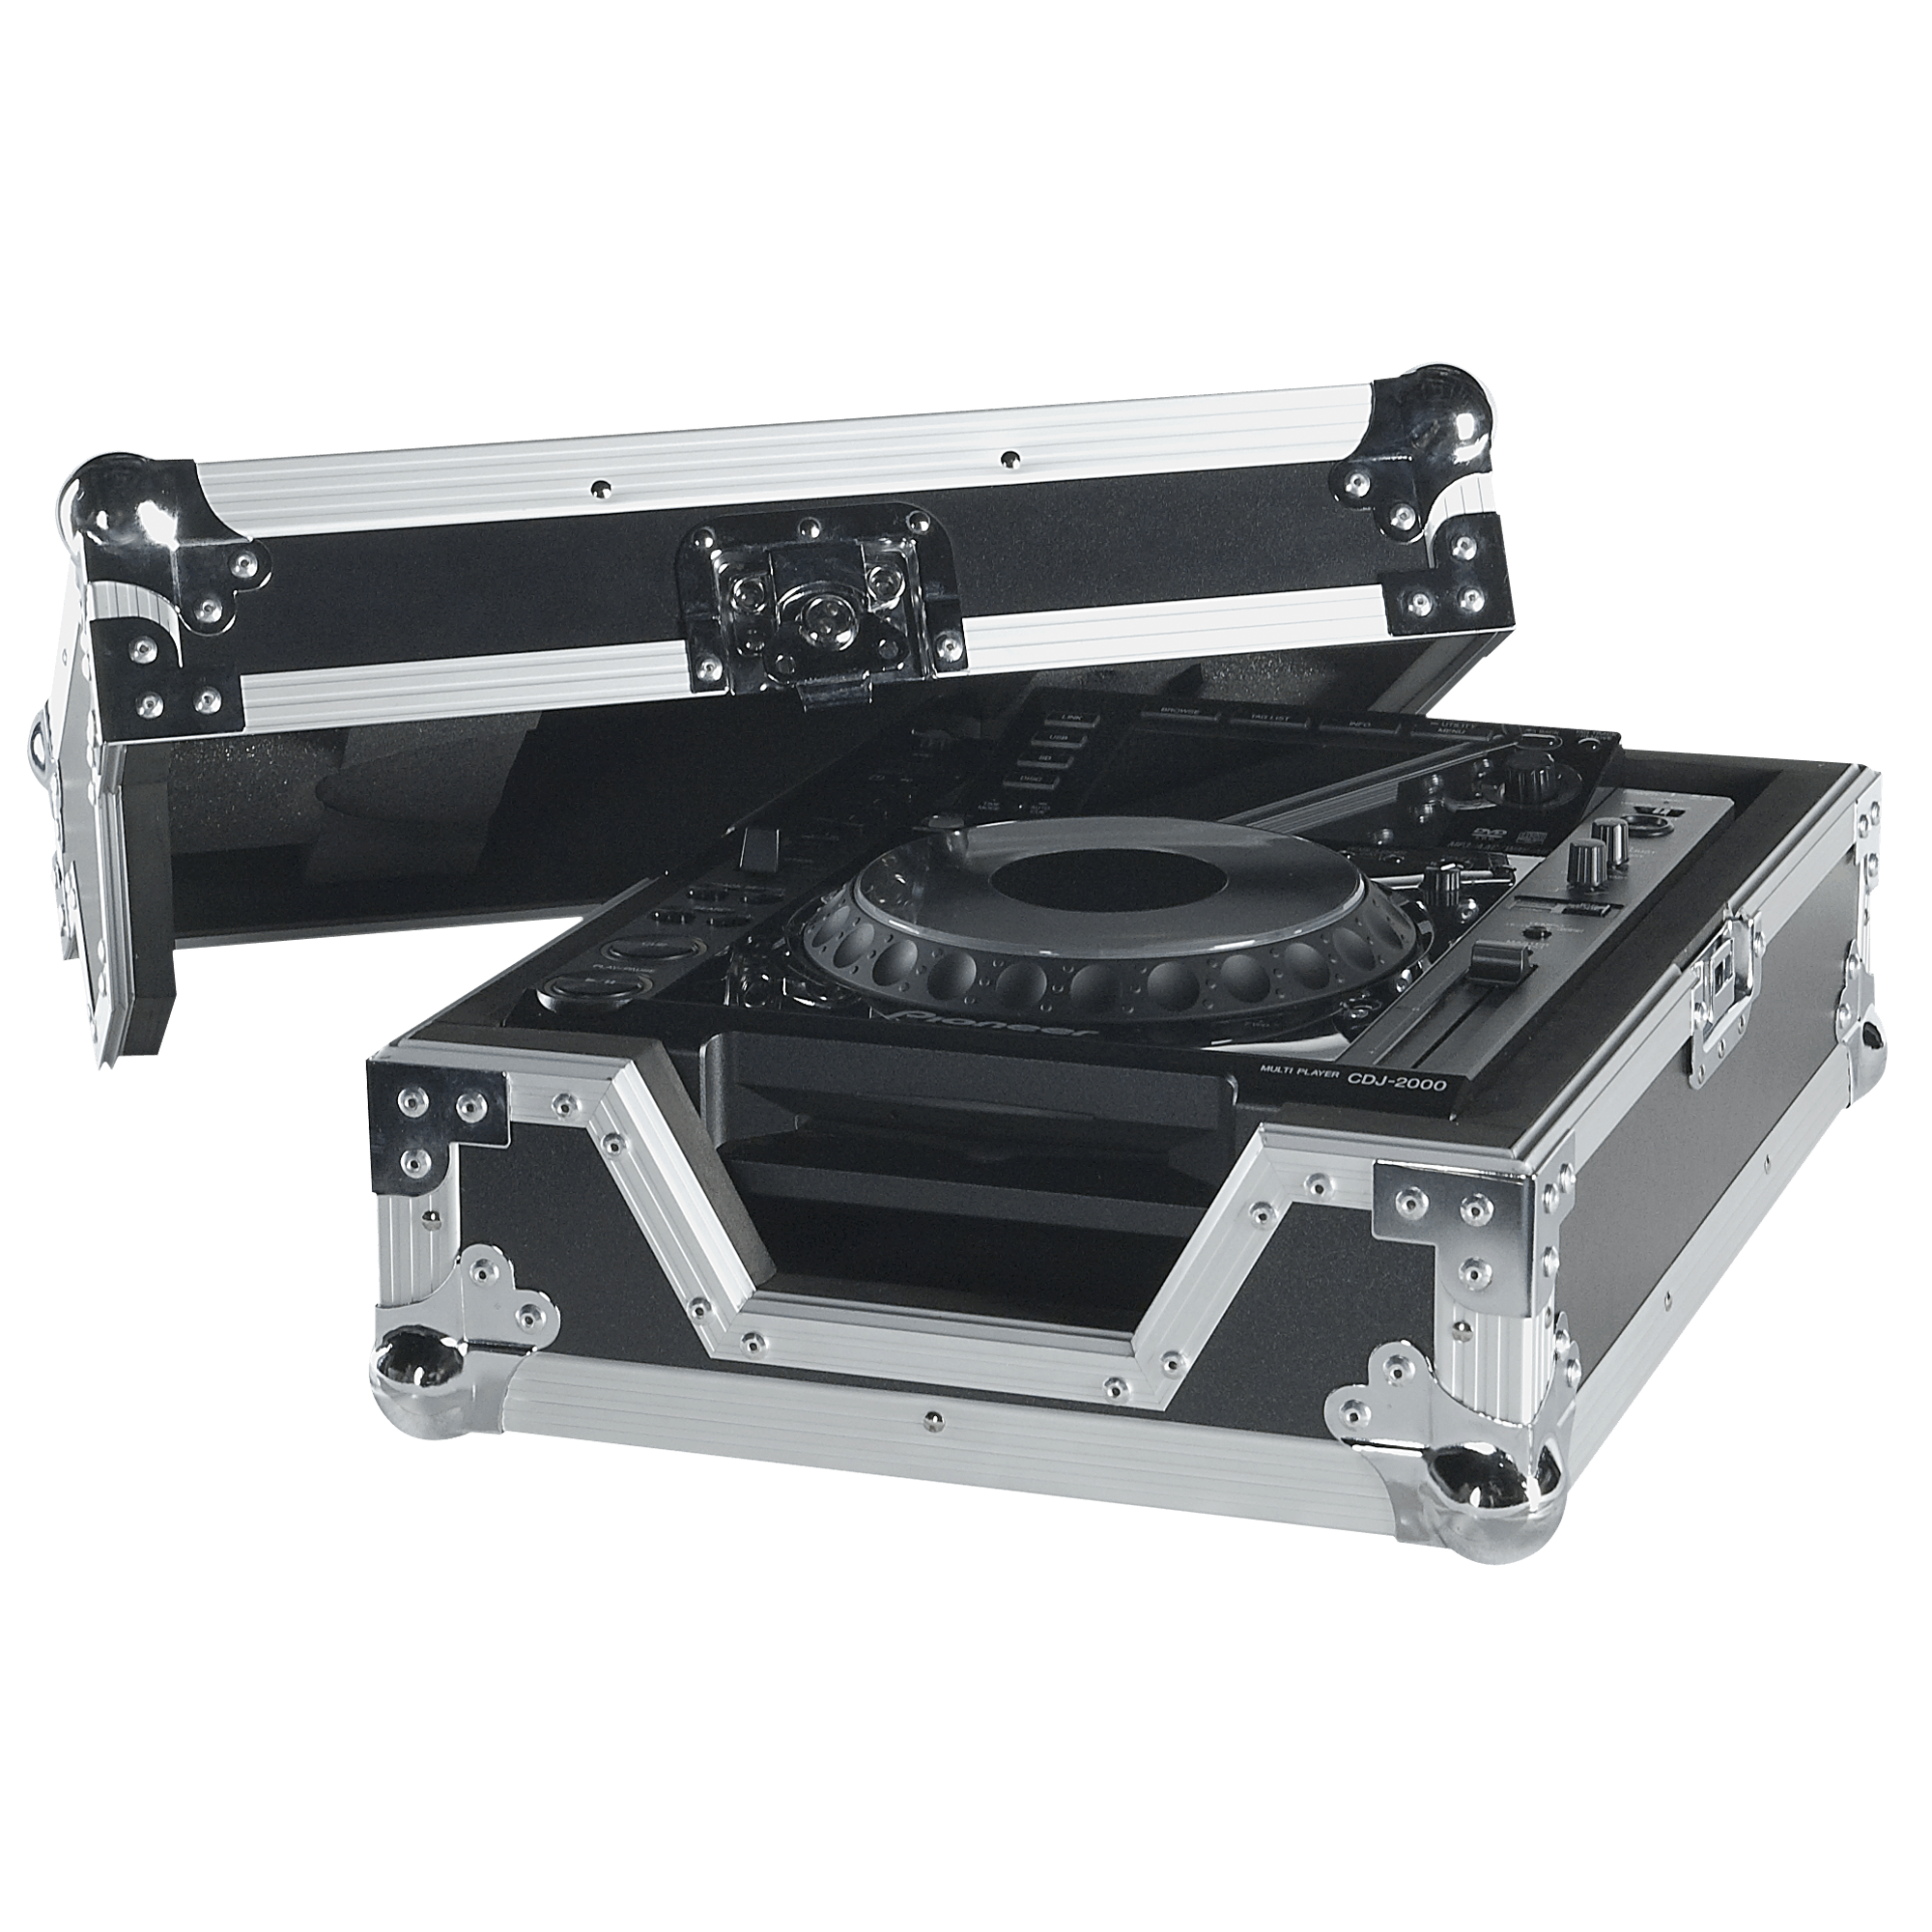 Showgear Case for Pioneer CDJ-player With space for cables - DY Pro Audio